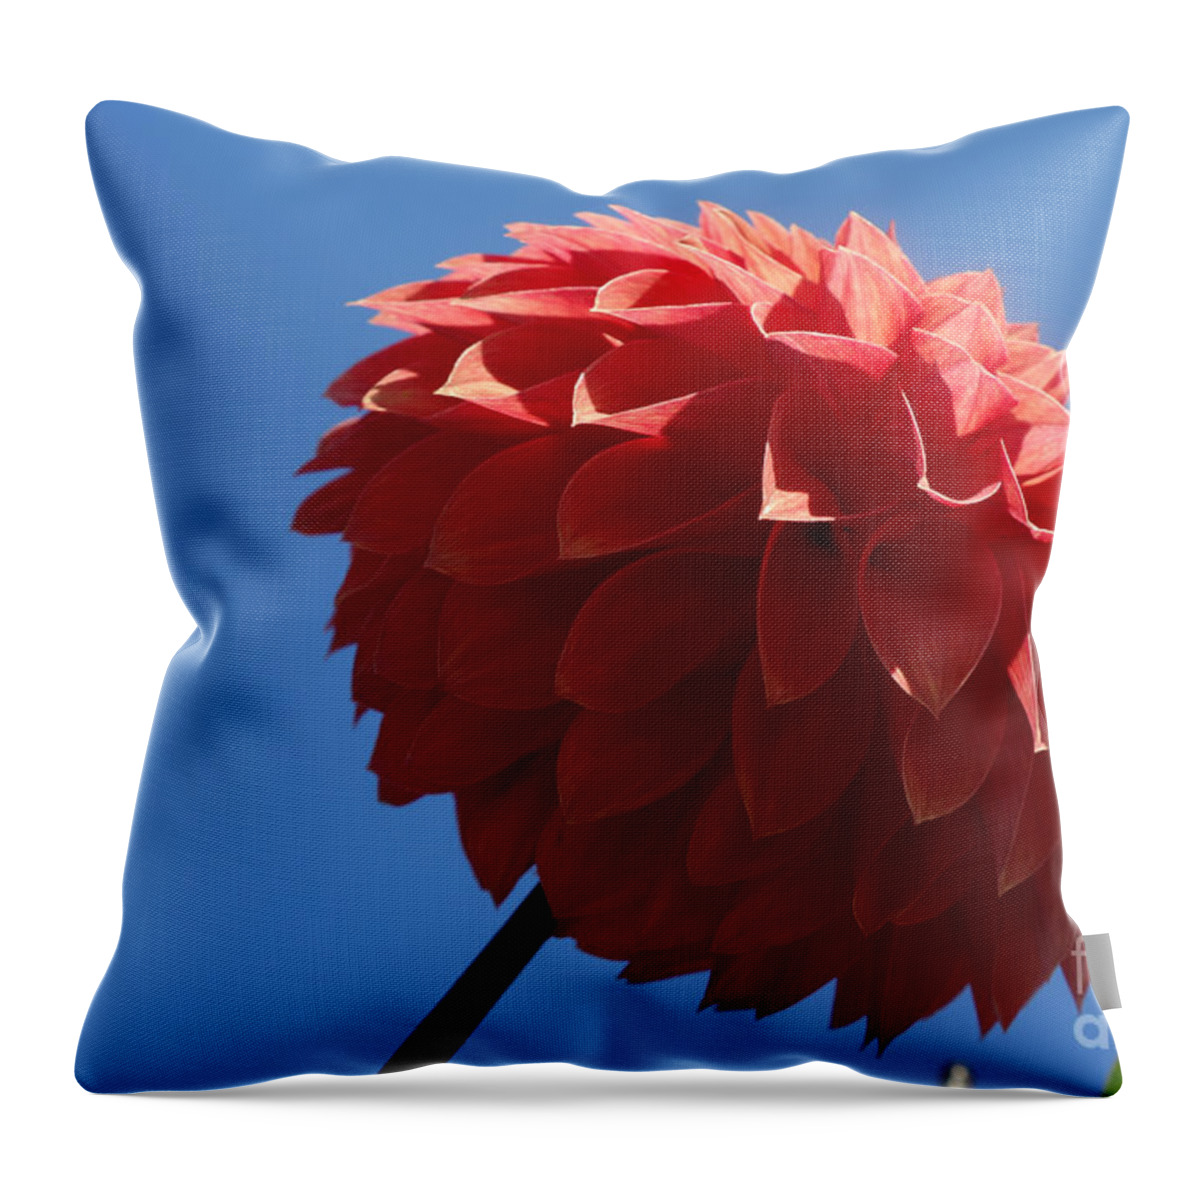 Flowing Throw Pillow featuring the photograph Dahlia #2 by Jacqueline Athmann